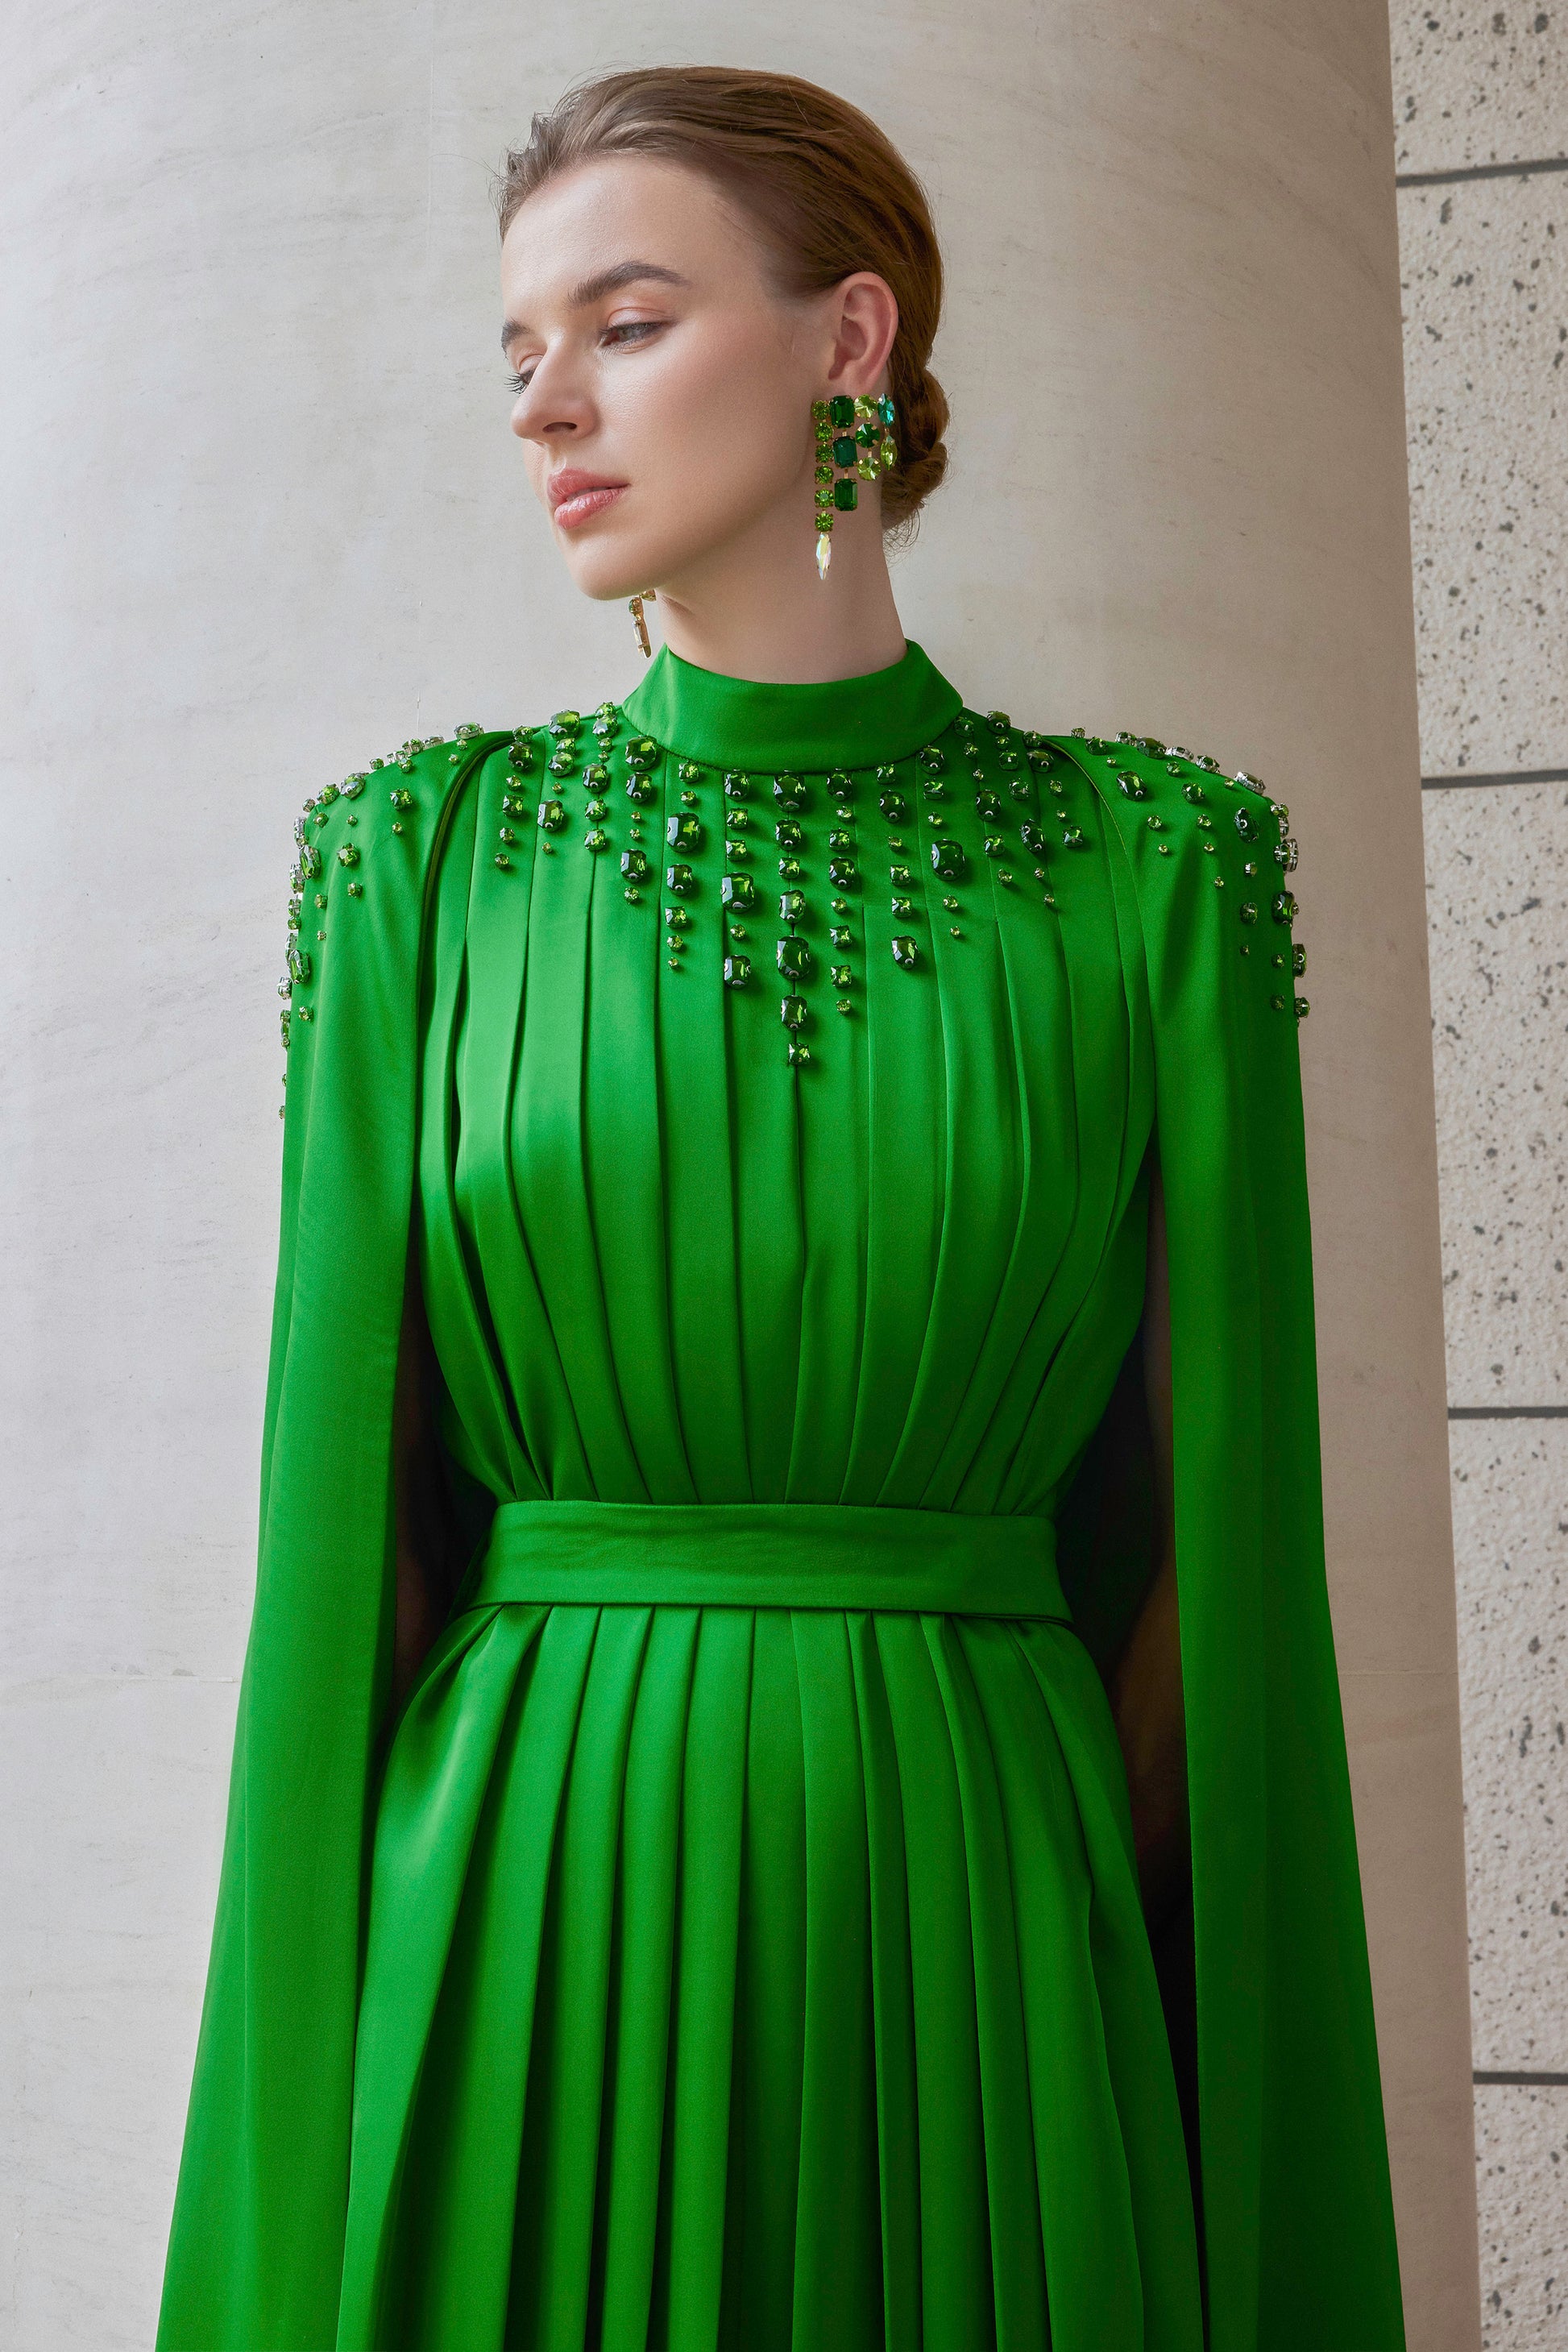 Emerald Long Pleated Trapeze Dress With Shoulder Cape by I.H.F Atelier